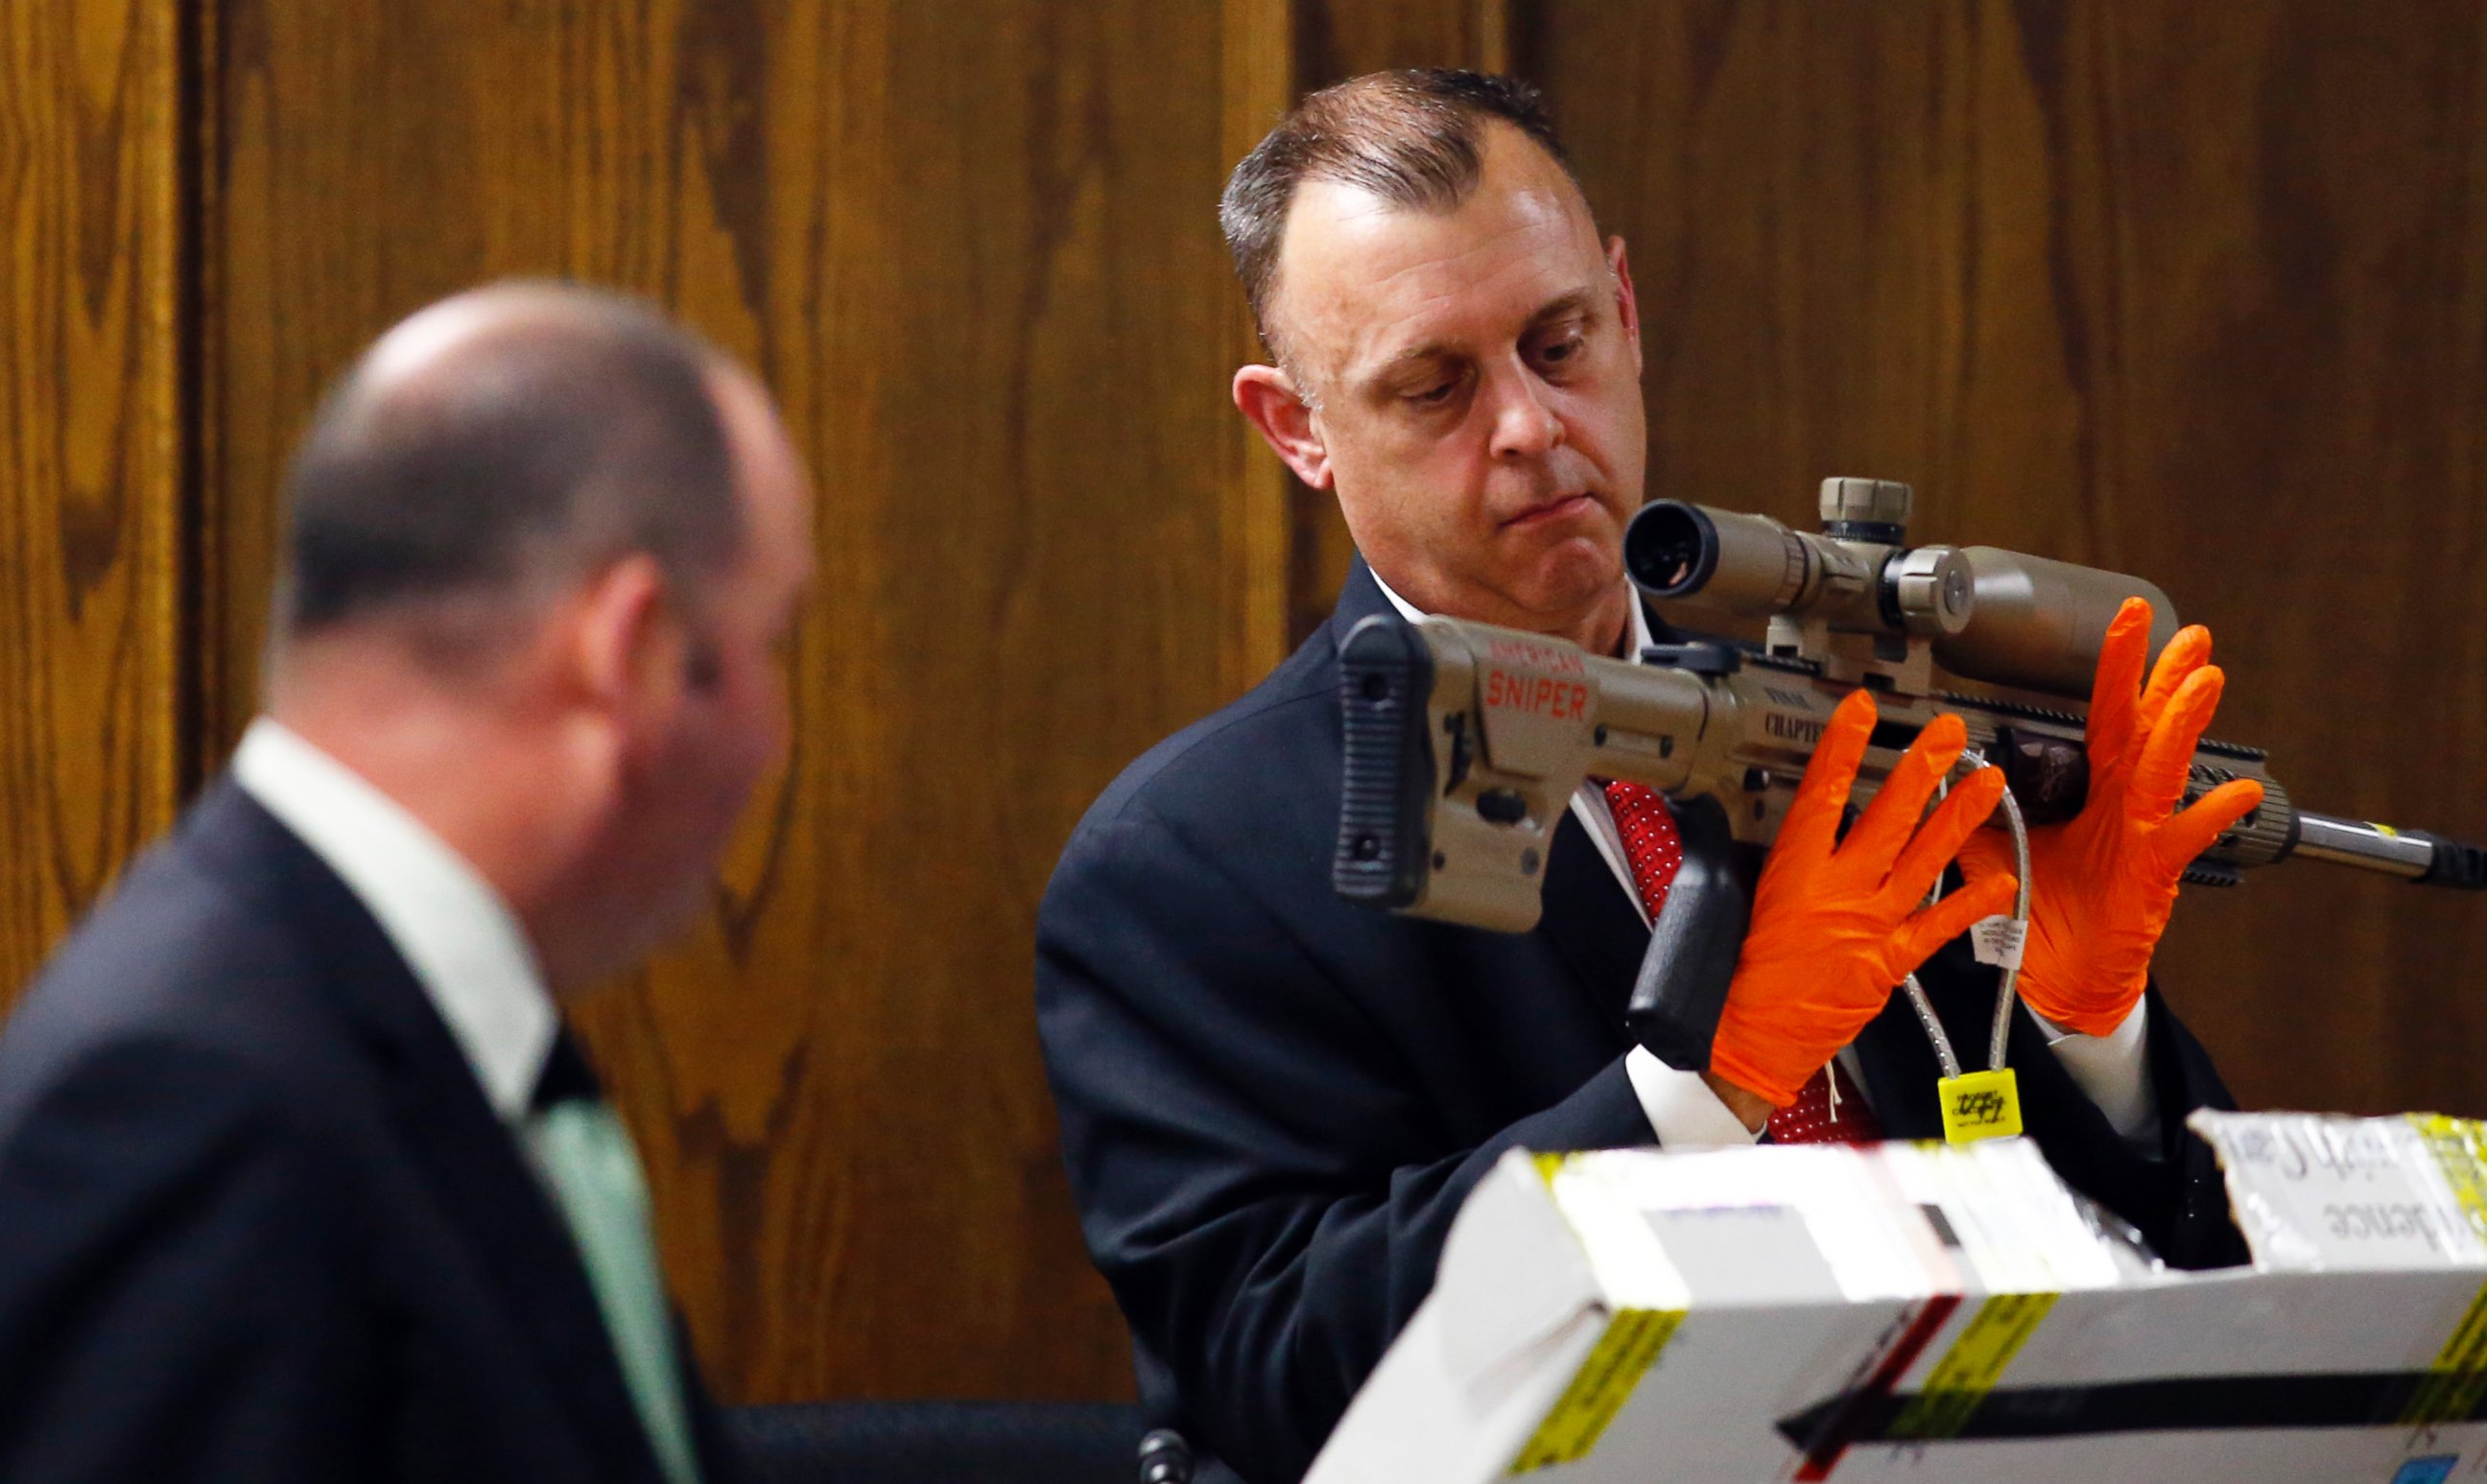 PHOTO: Texas Ranger Michael Adcock holds a rifle with the lettering "American Sniper" marked on the side during the capital murder trial of former Marine Cpl. Eddie Ray Routh in Stephenville, Texas on Feb. 17, 2015.